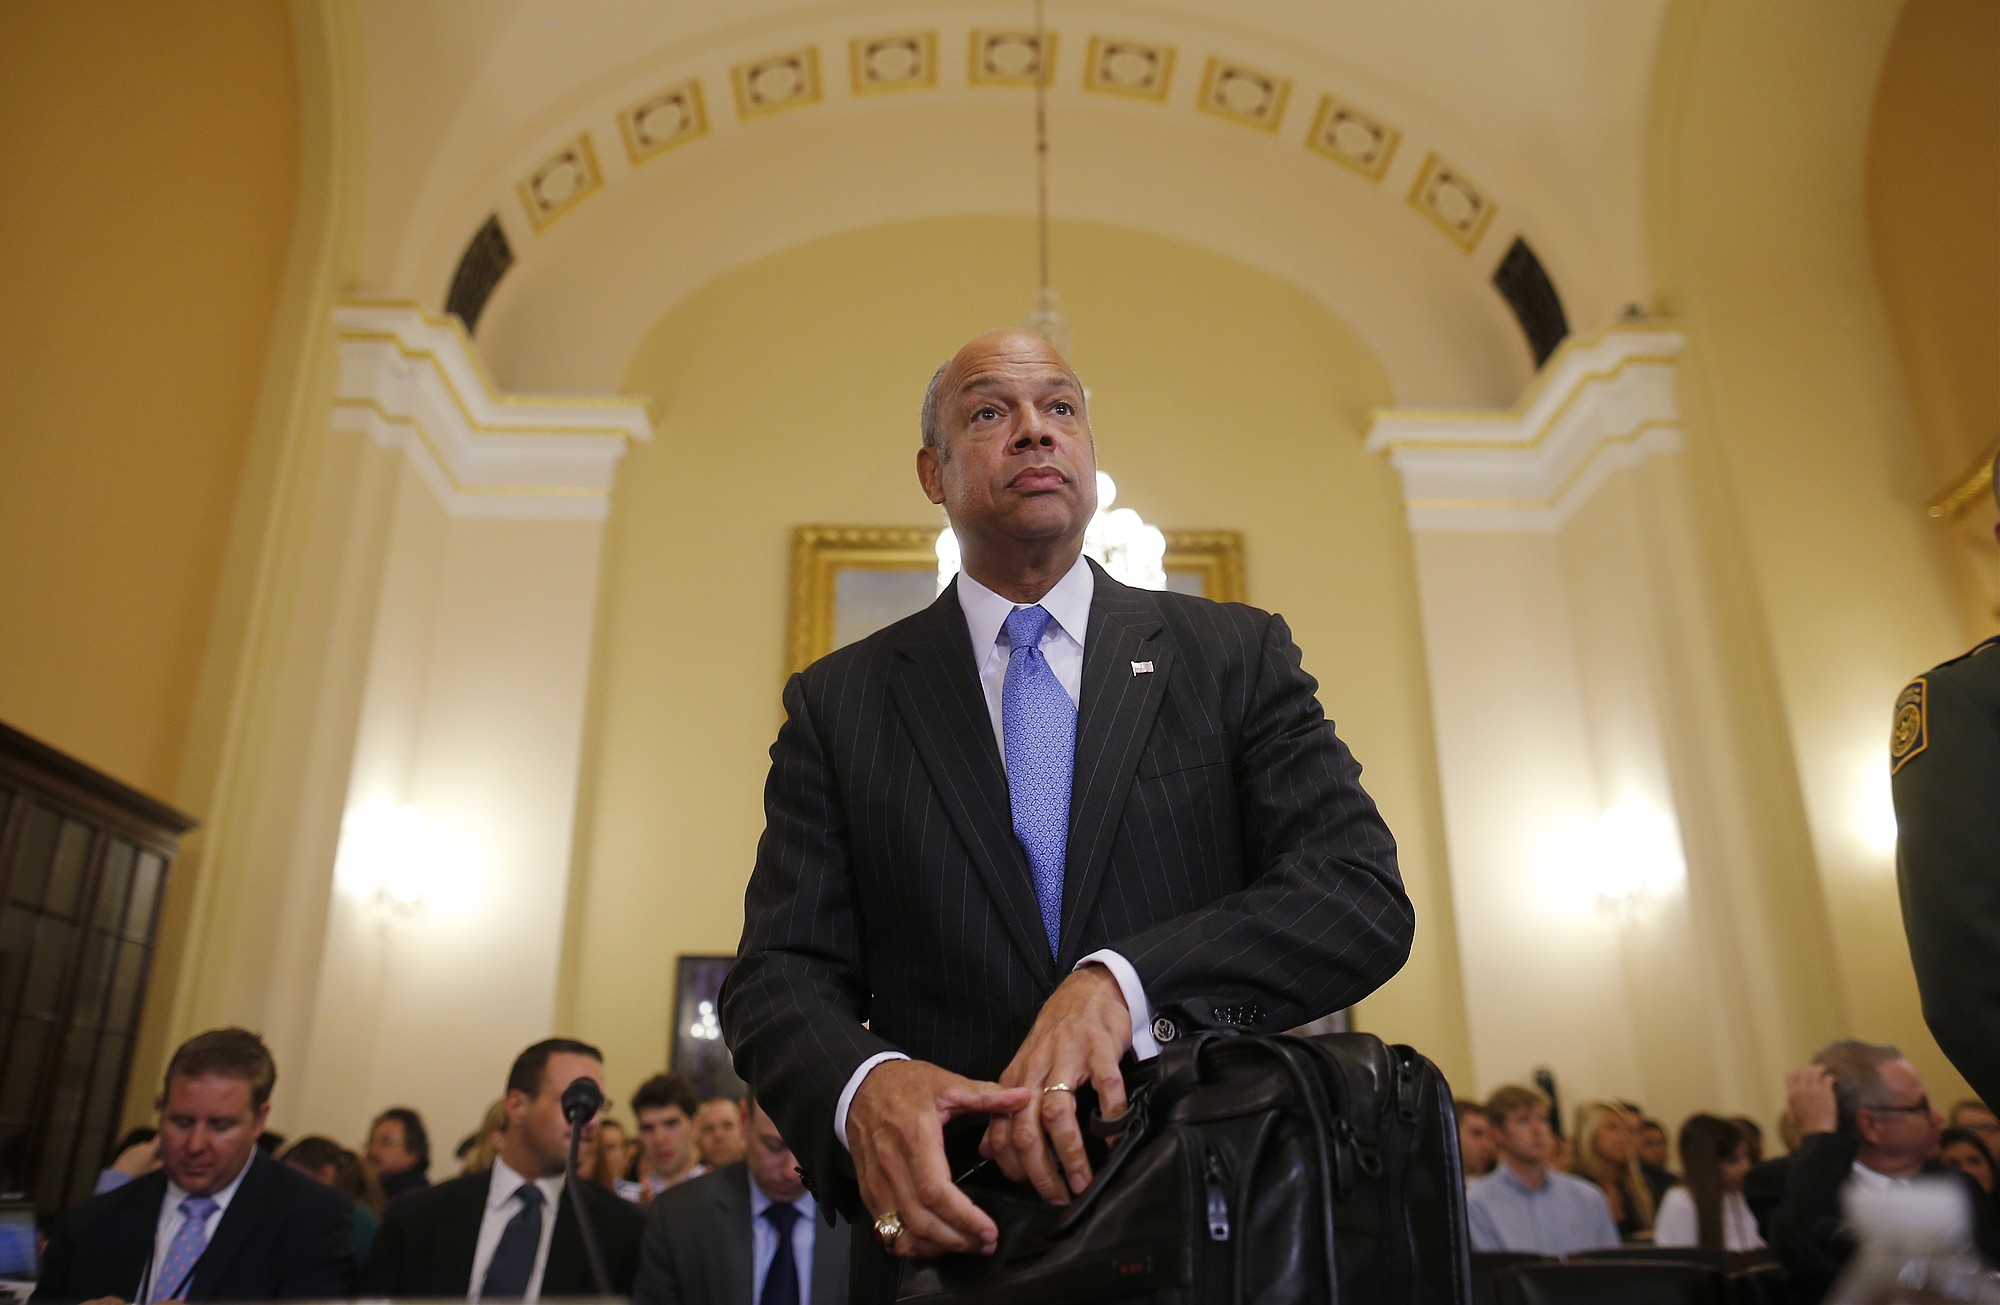 Homeland Security Secretary Jeh Johnson arrives to testify before the House Committee on Homeland Security on Capitol Hill in Washington about the growing problem of unaccompanied children crossing the border into the United States.